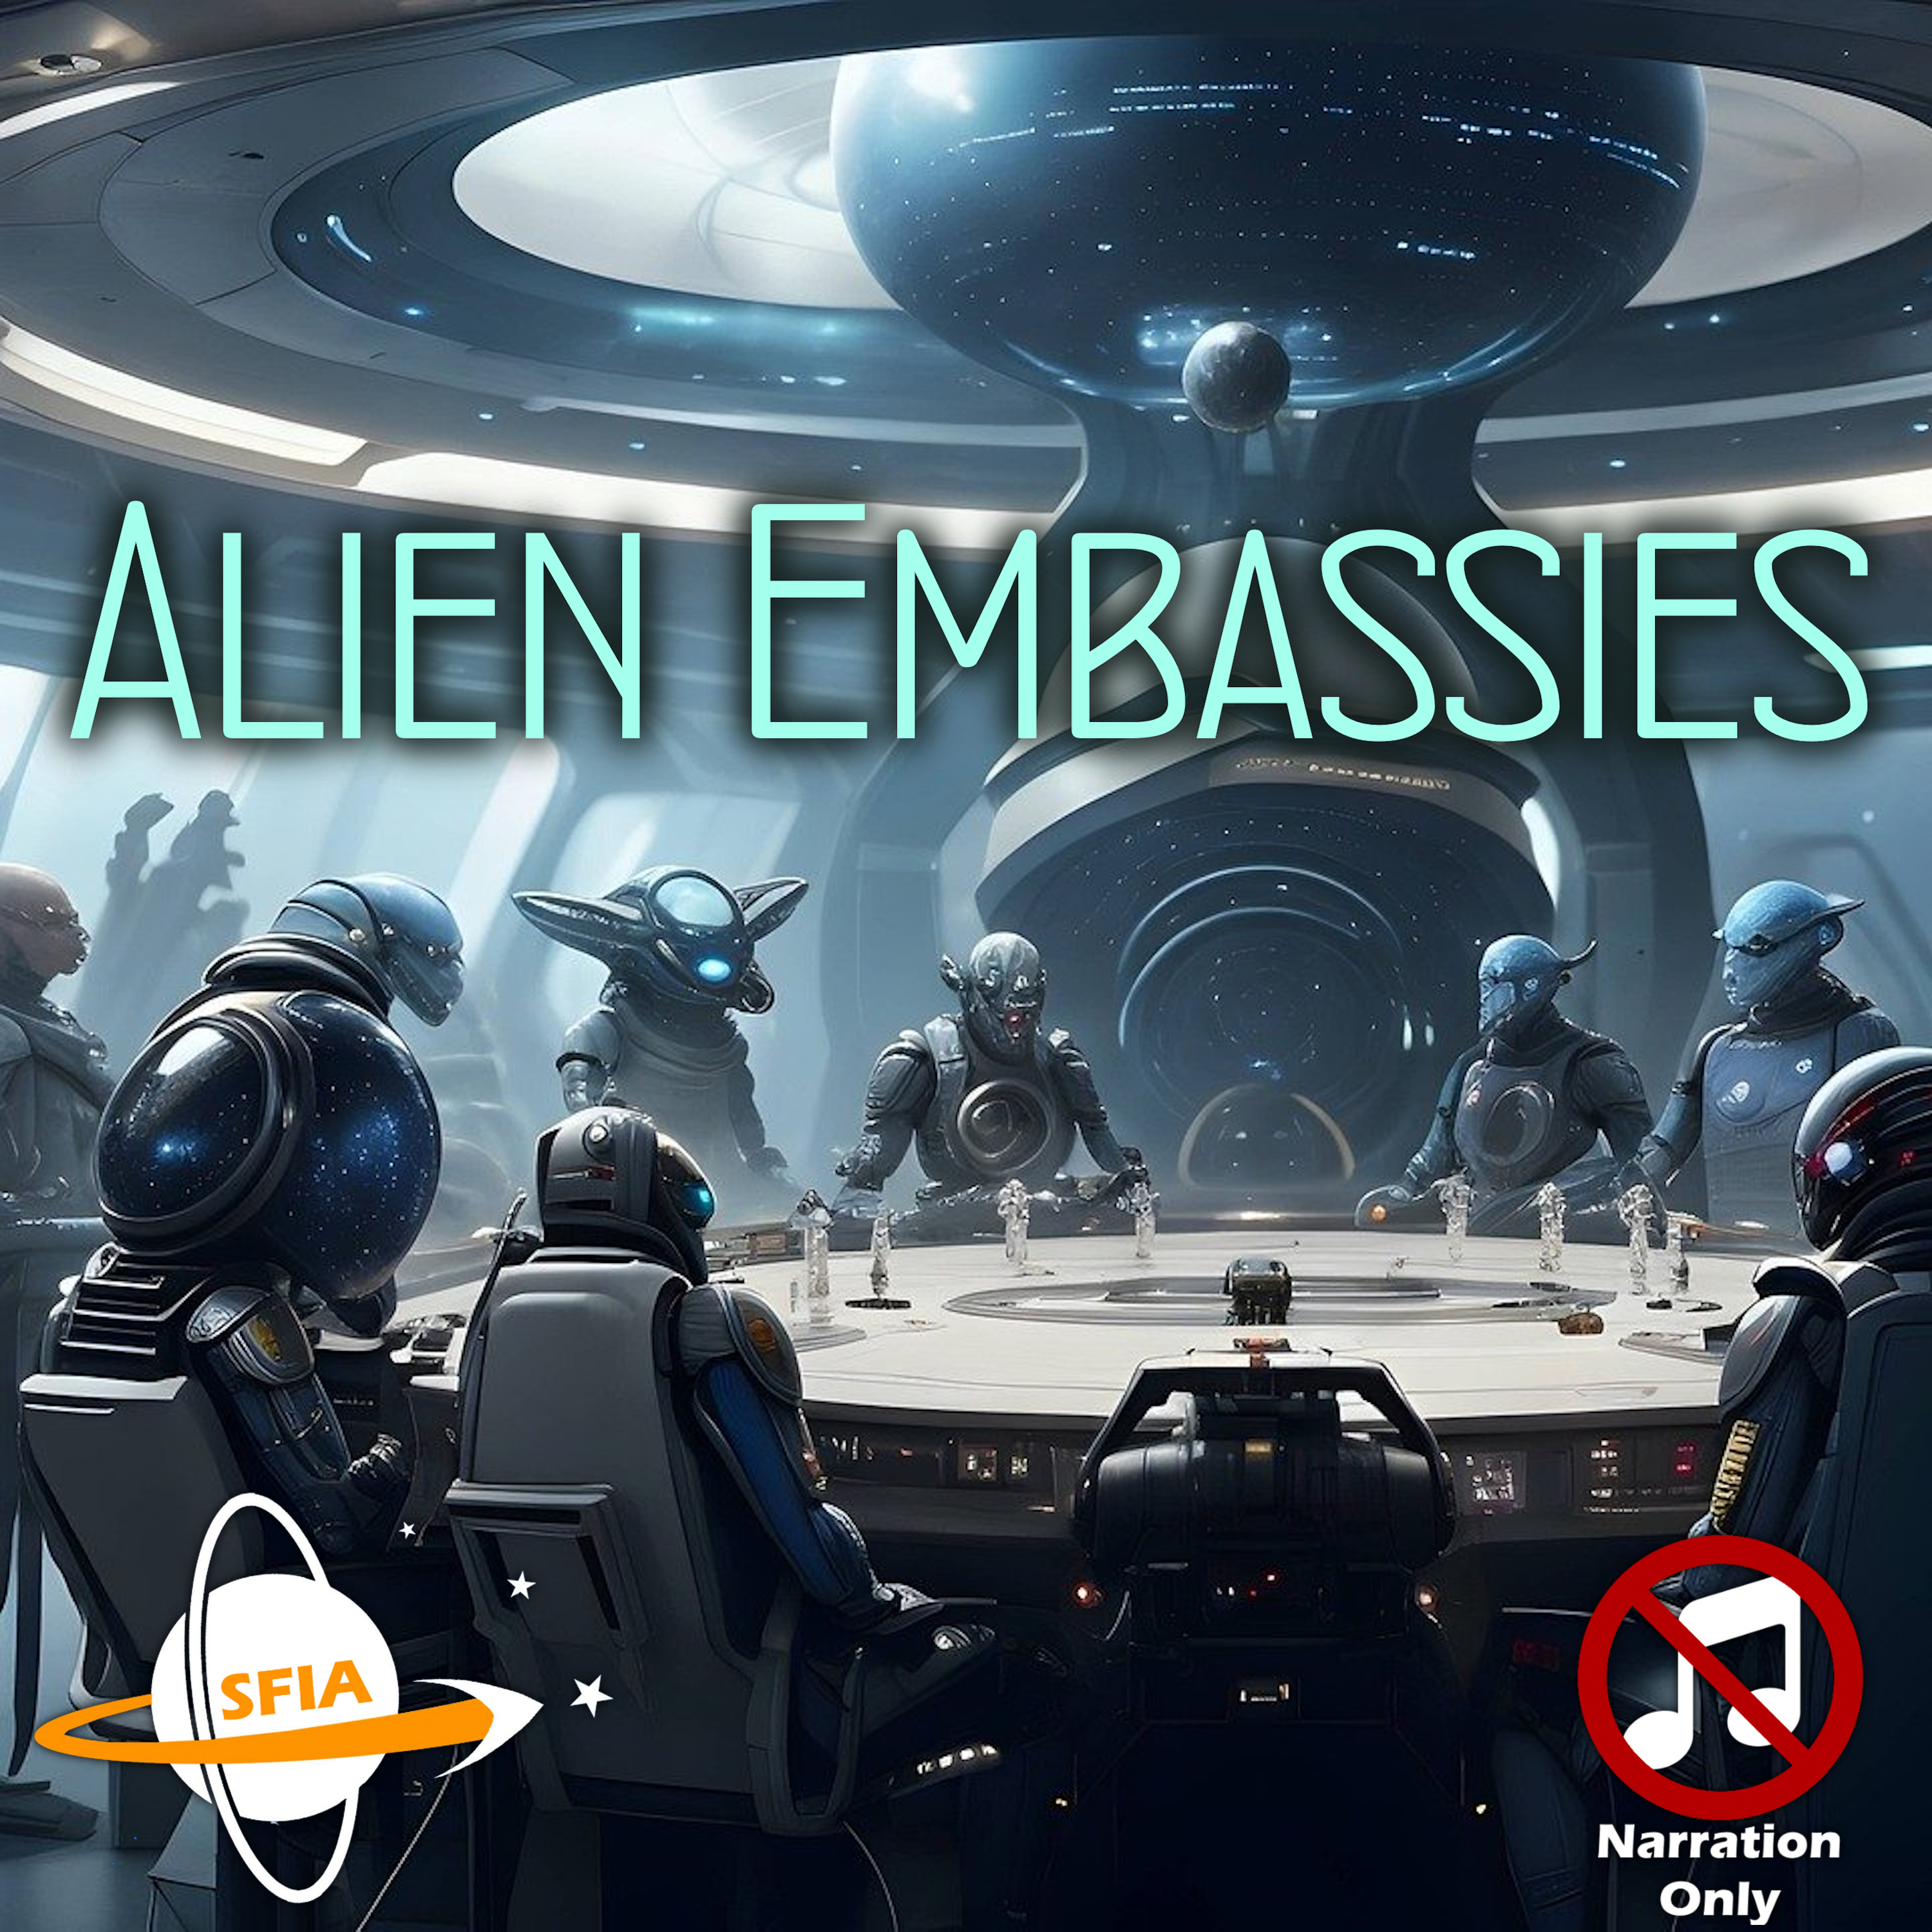 Alien Embassies (Narration Only)